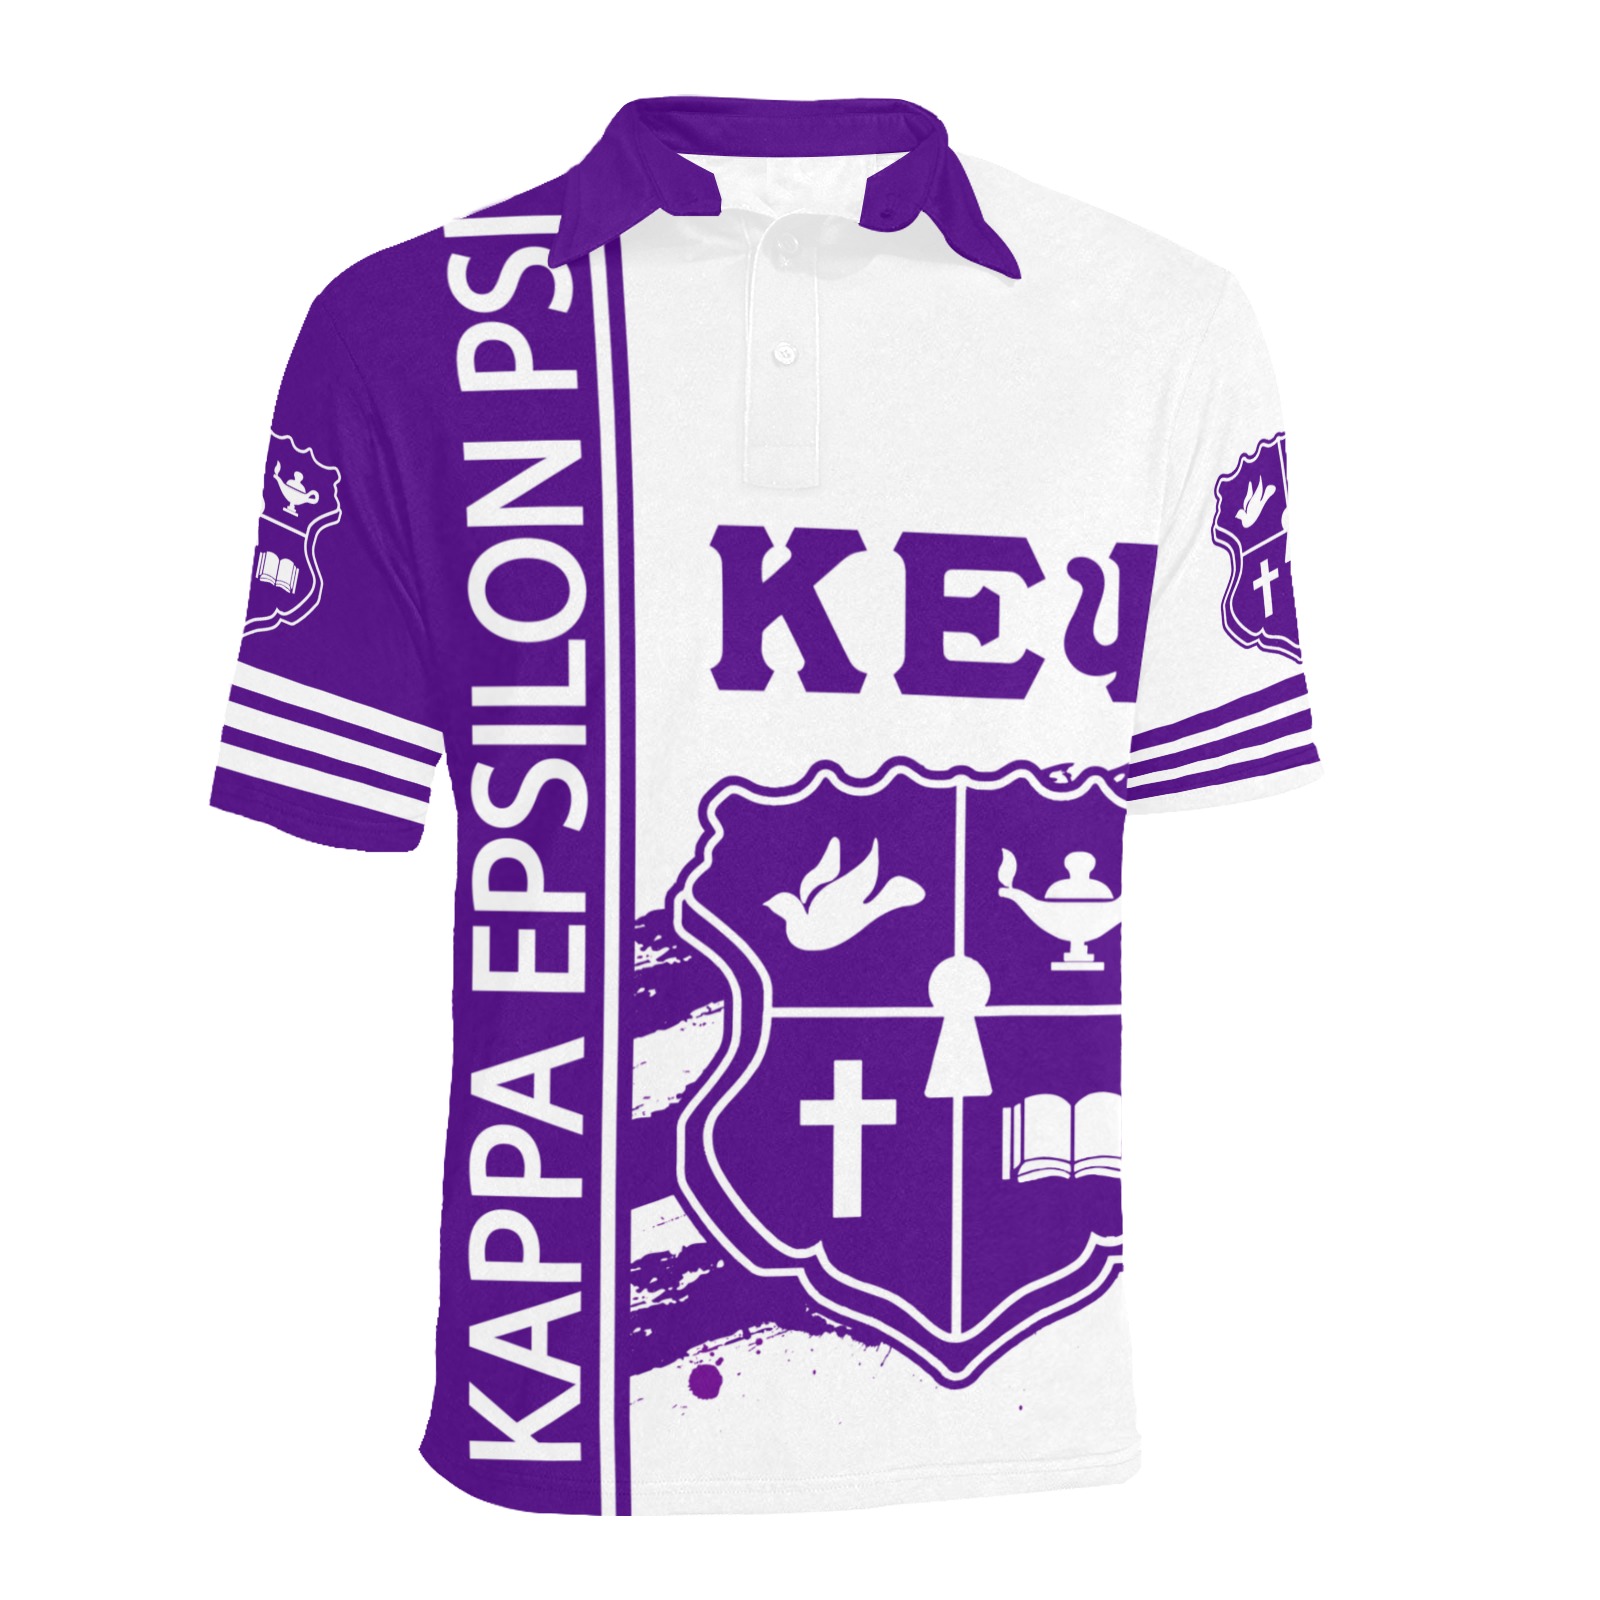 Purple and white fraternity polo shirt design.